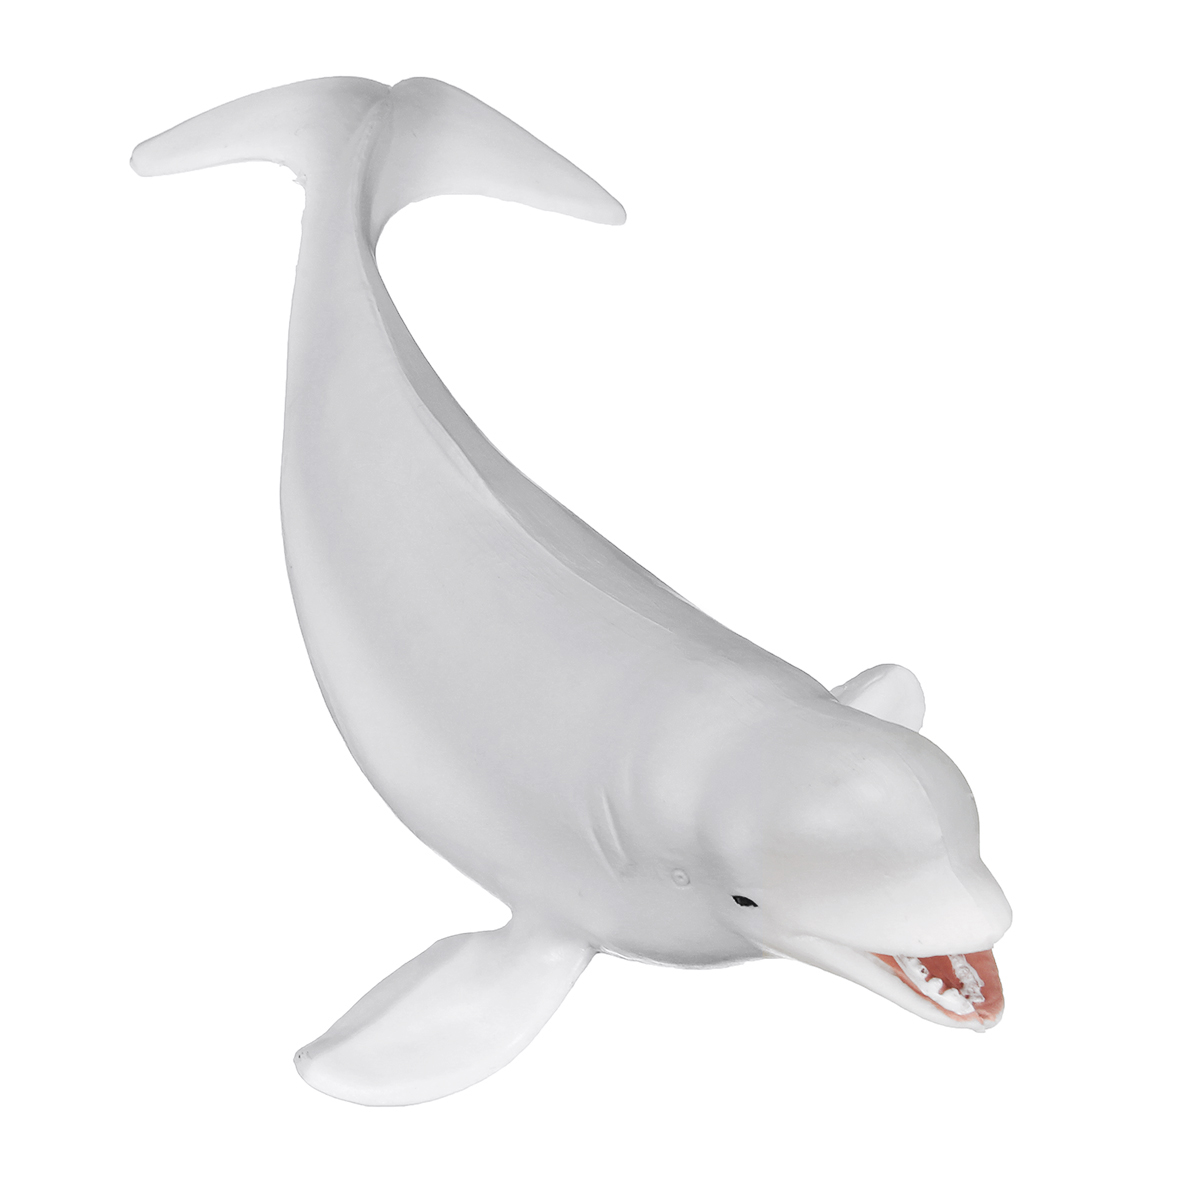 Realistic-Ocean-Animal-Model-Marine-Animal-Solid-Whale-Shark-Series-Science-Education-Puzzle-Toys-1460134-2